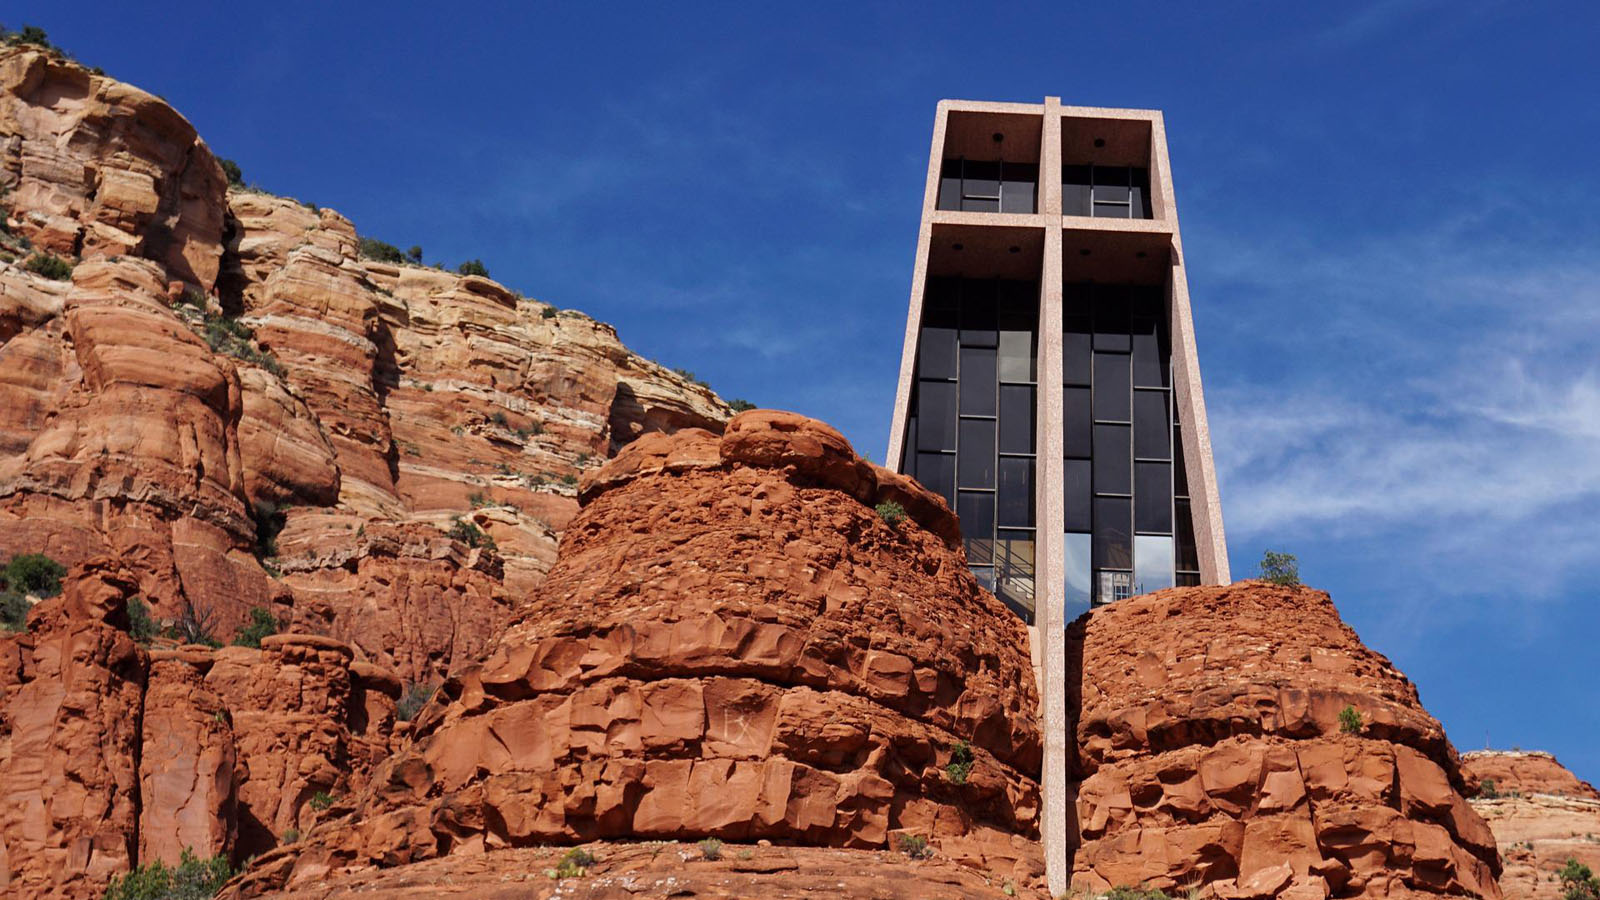 Best Things To Do In Sedona - Chapel Of The Holy Cross